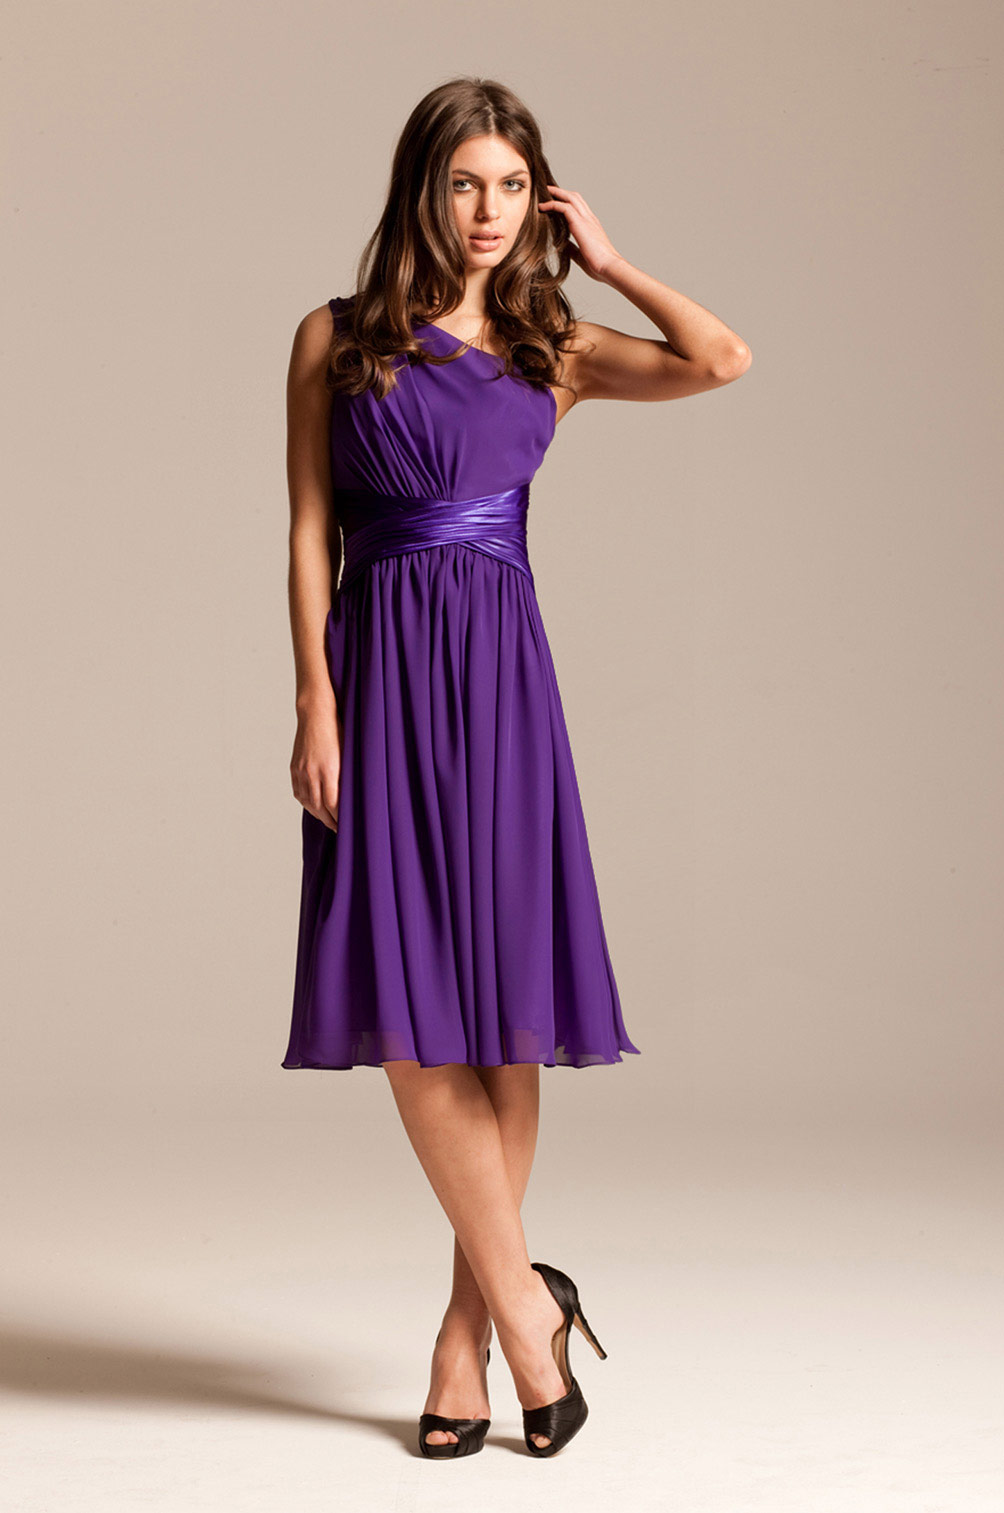 Purple Cocktail Dress Picture Collection | Dressed Up Girl